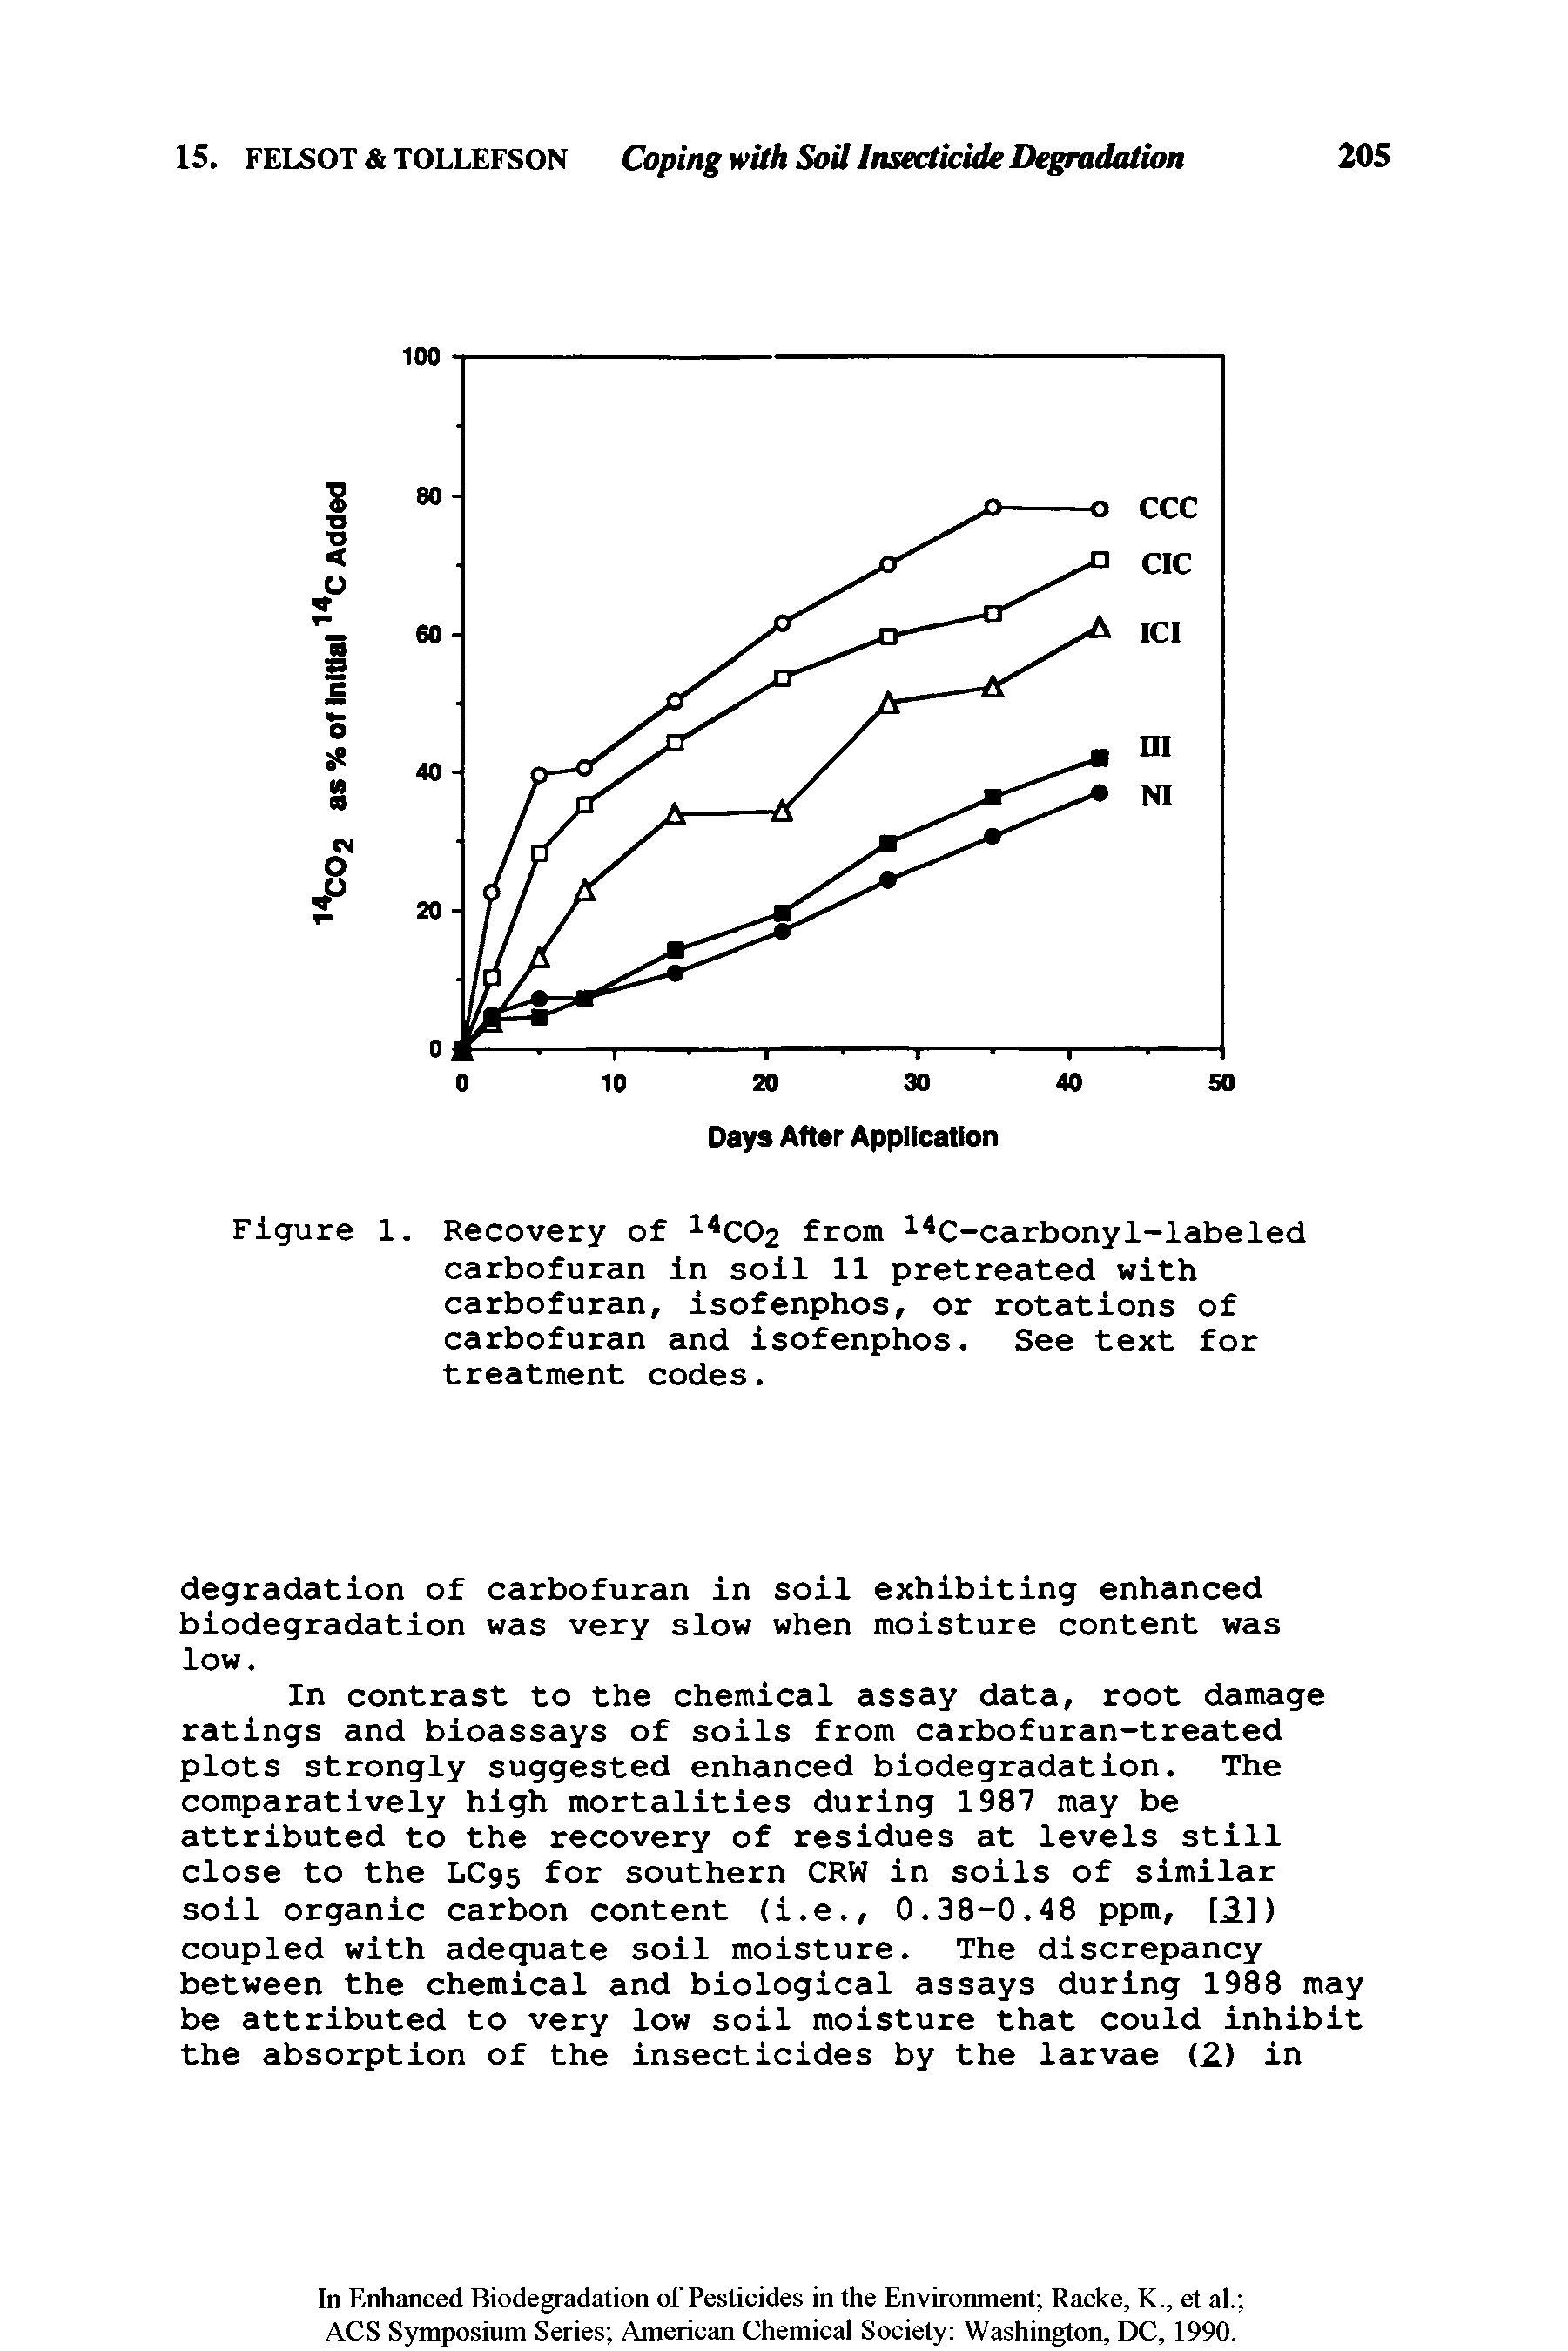 Figure 1. Recovery of 14CC>2 from 14C-carbonyl-labeled carbofuran in soil 11 pretreated with carbofuran, isofenphos, or rotations of carbofuran and isofenphos. See text for treatment codes.